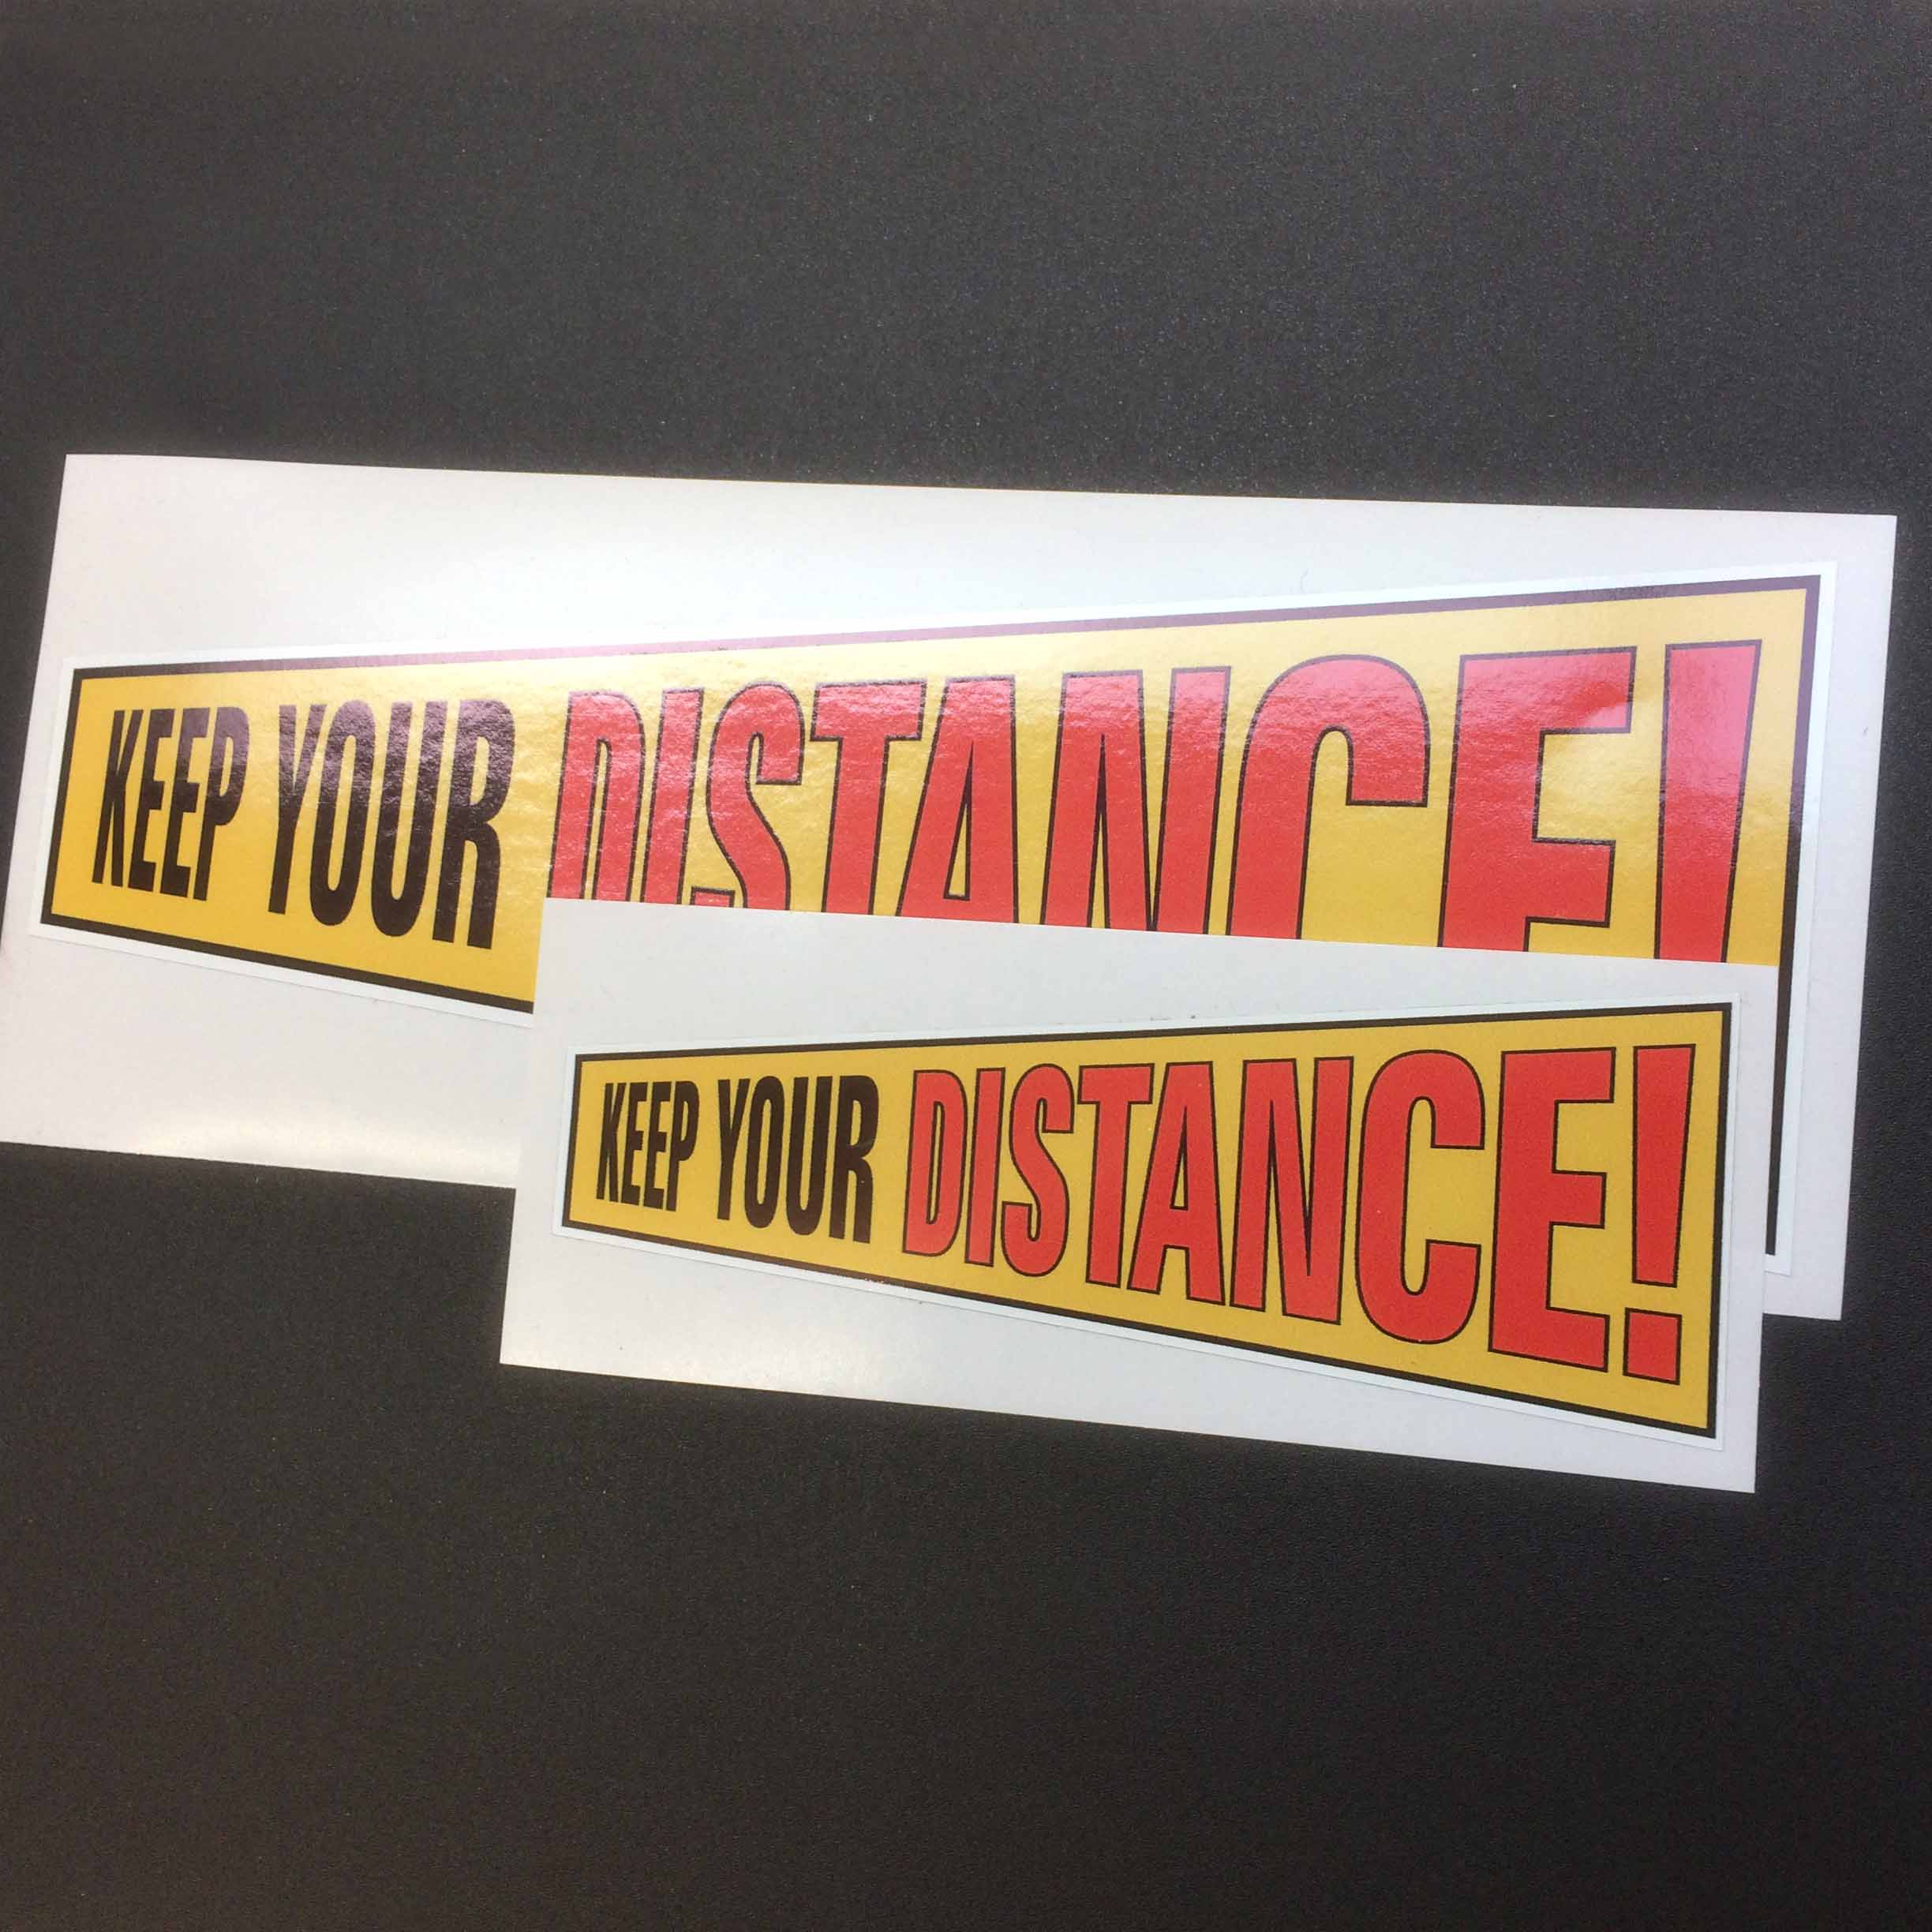 Keep Your in black lettering. Distance! in red lettering. On a yellow background.